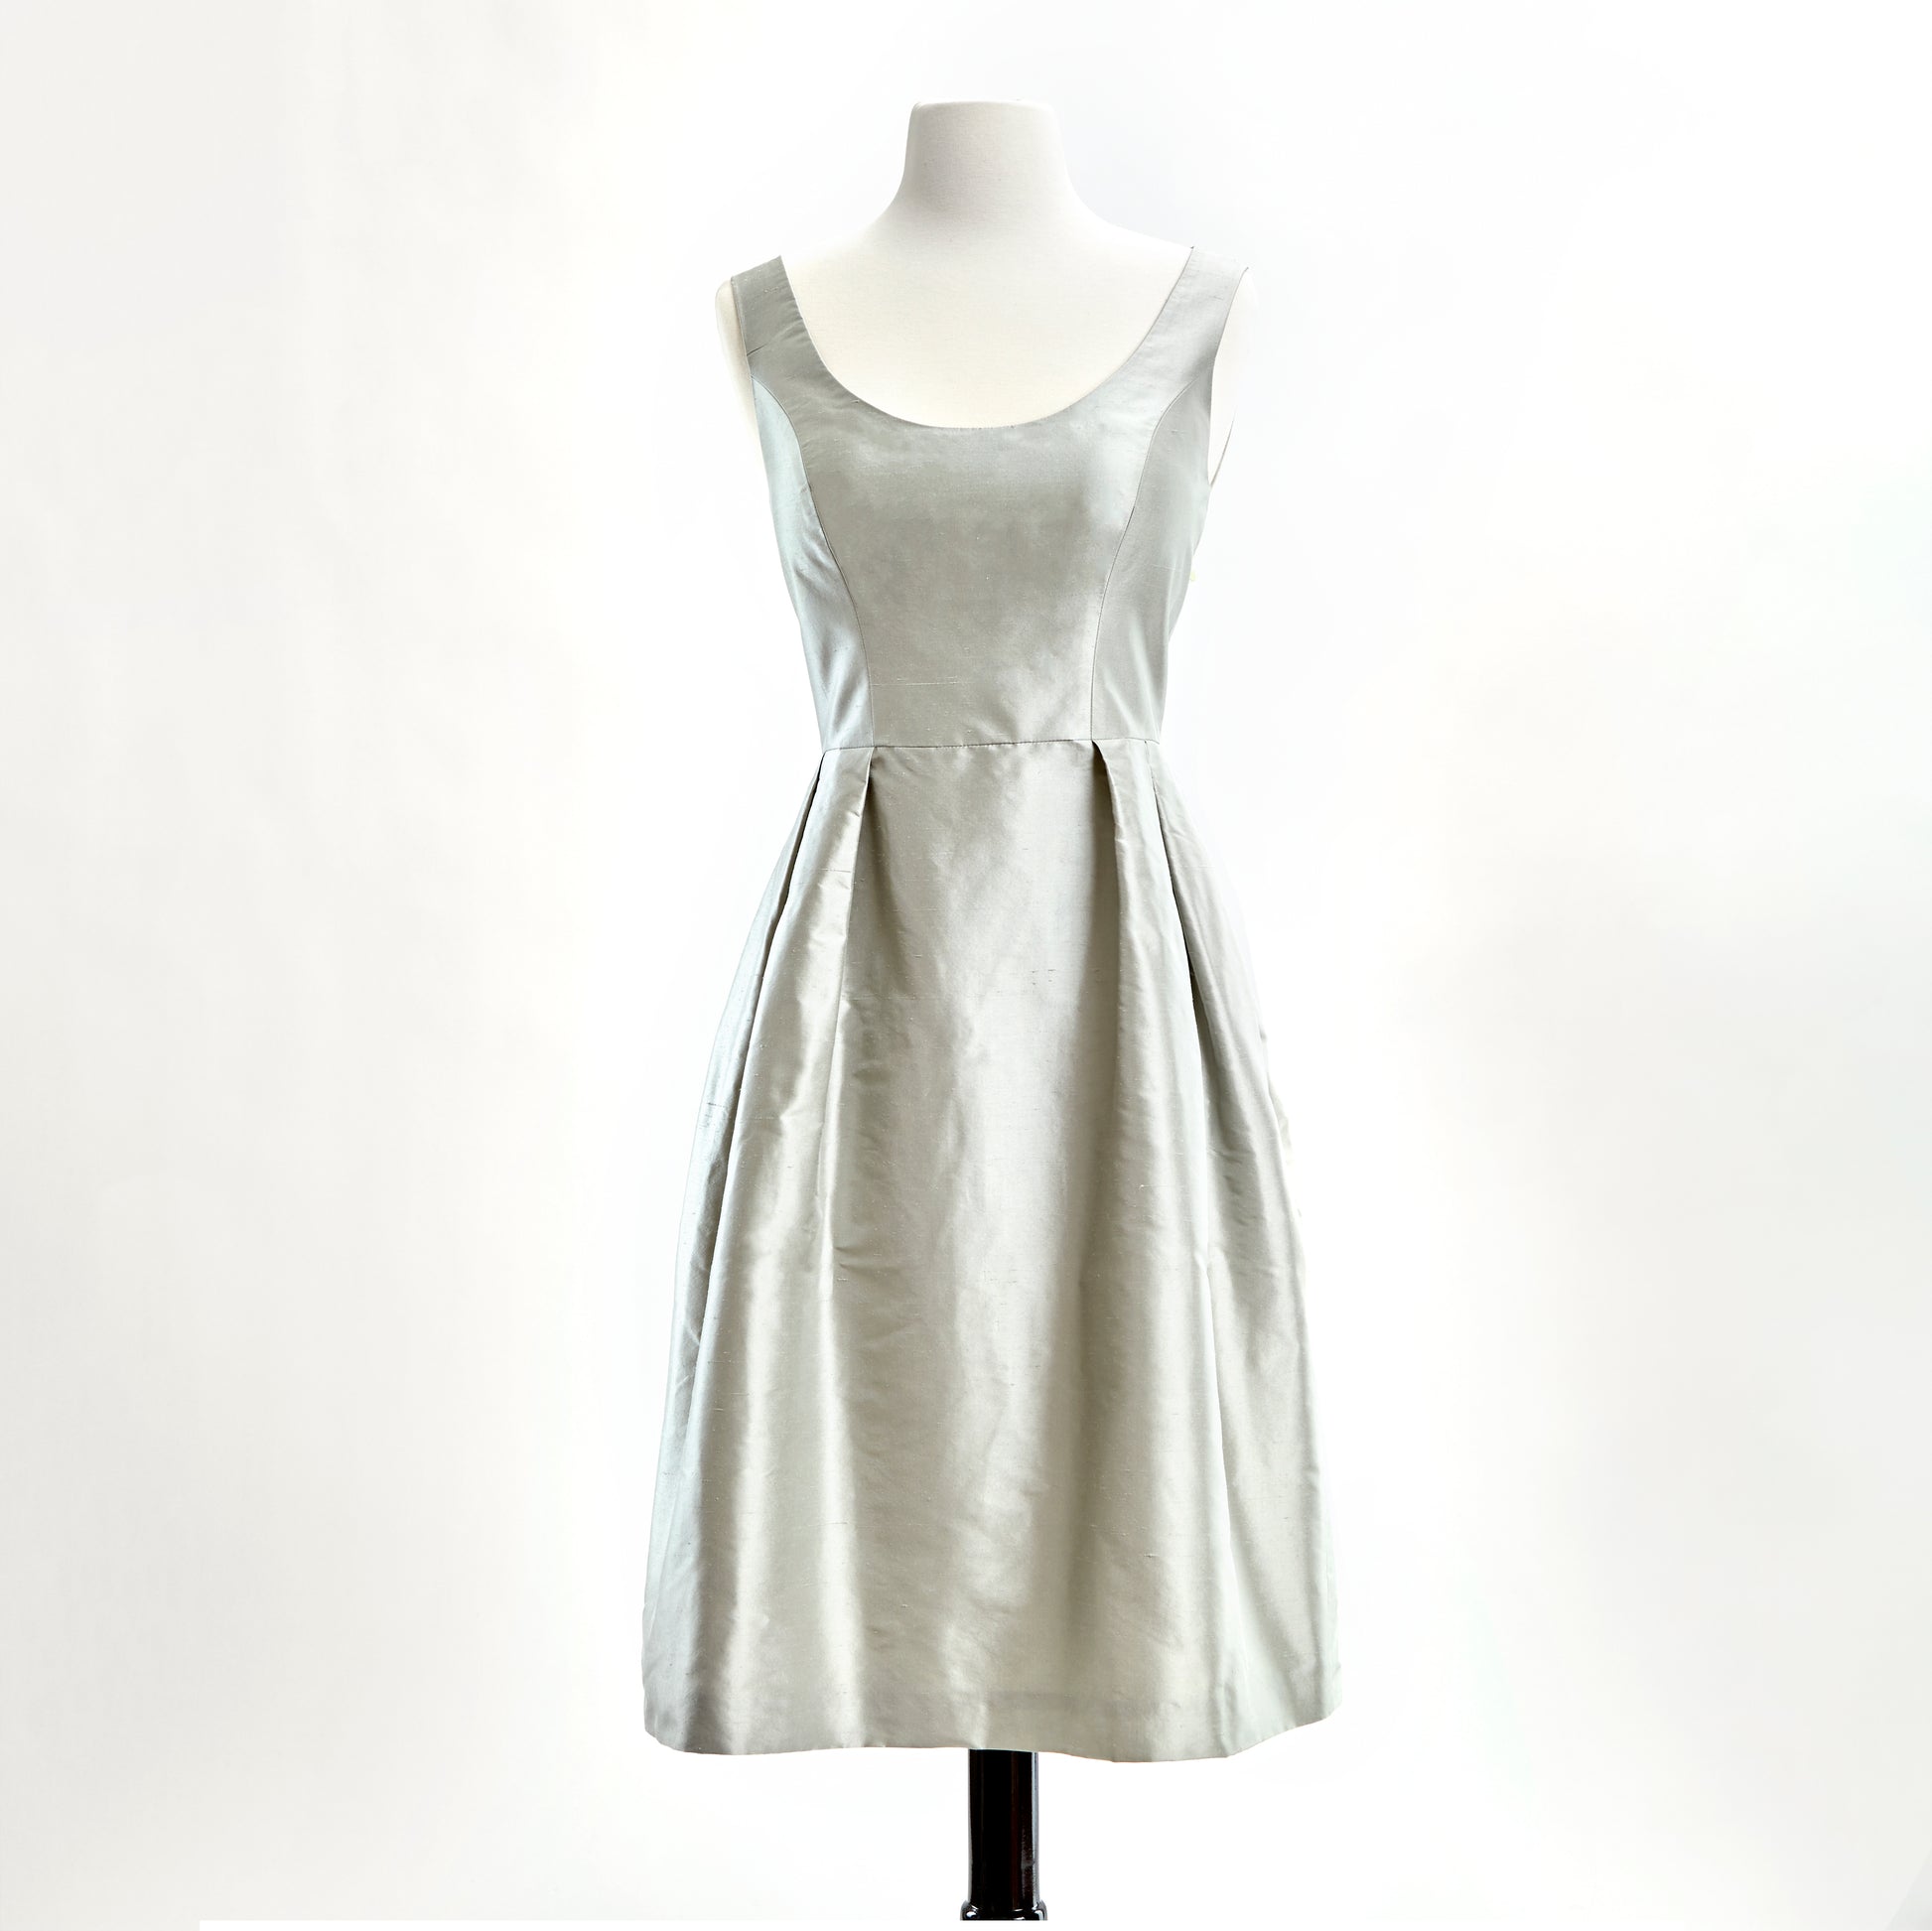 Silver shantung dress with scoop neck and pleated skirt